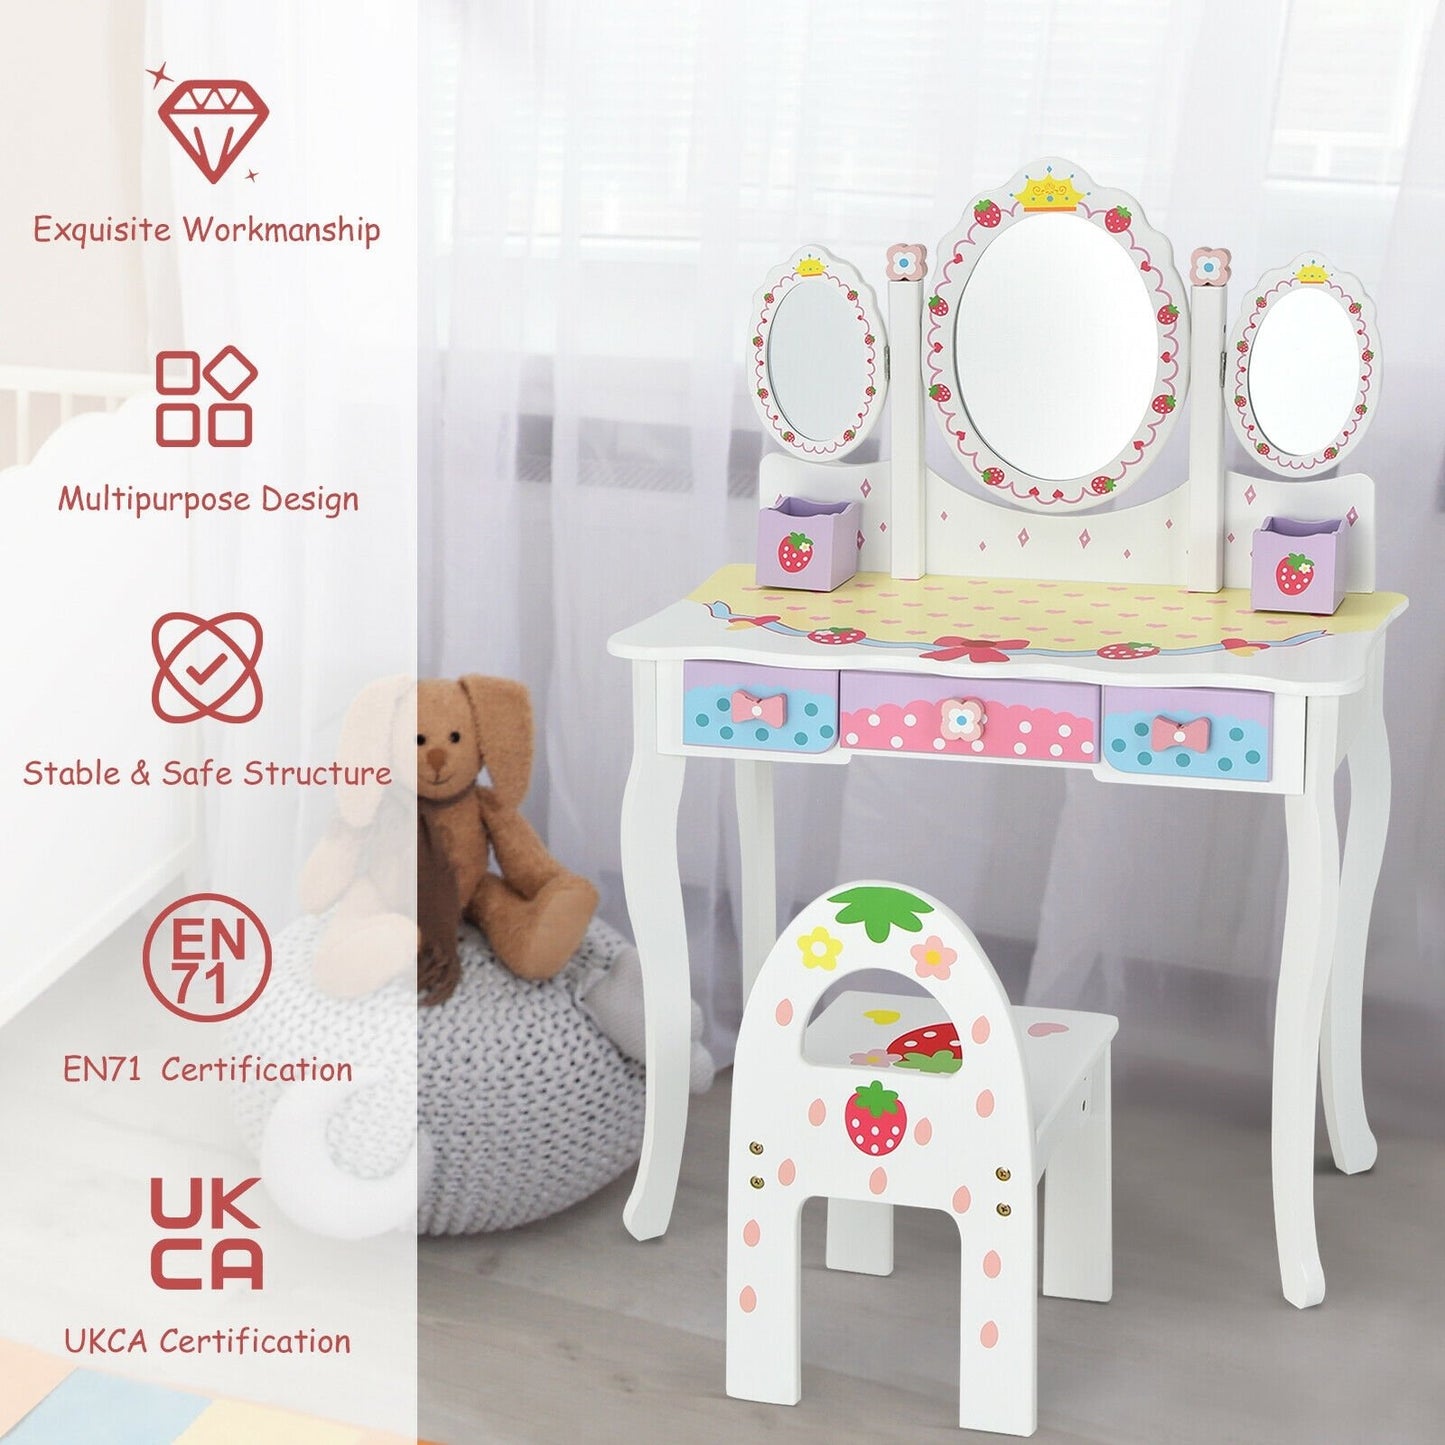 Kids Vanity Princess Makeup Dressing Table Chair Set with Tri-fold Mirror, White - Gallery Canada